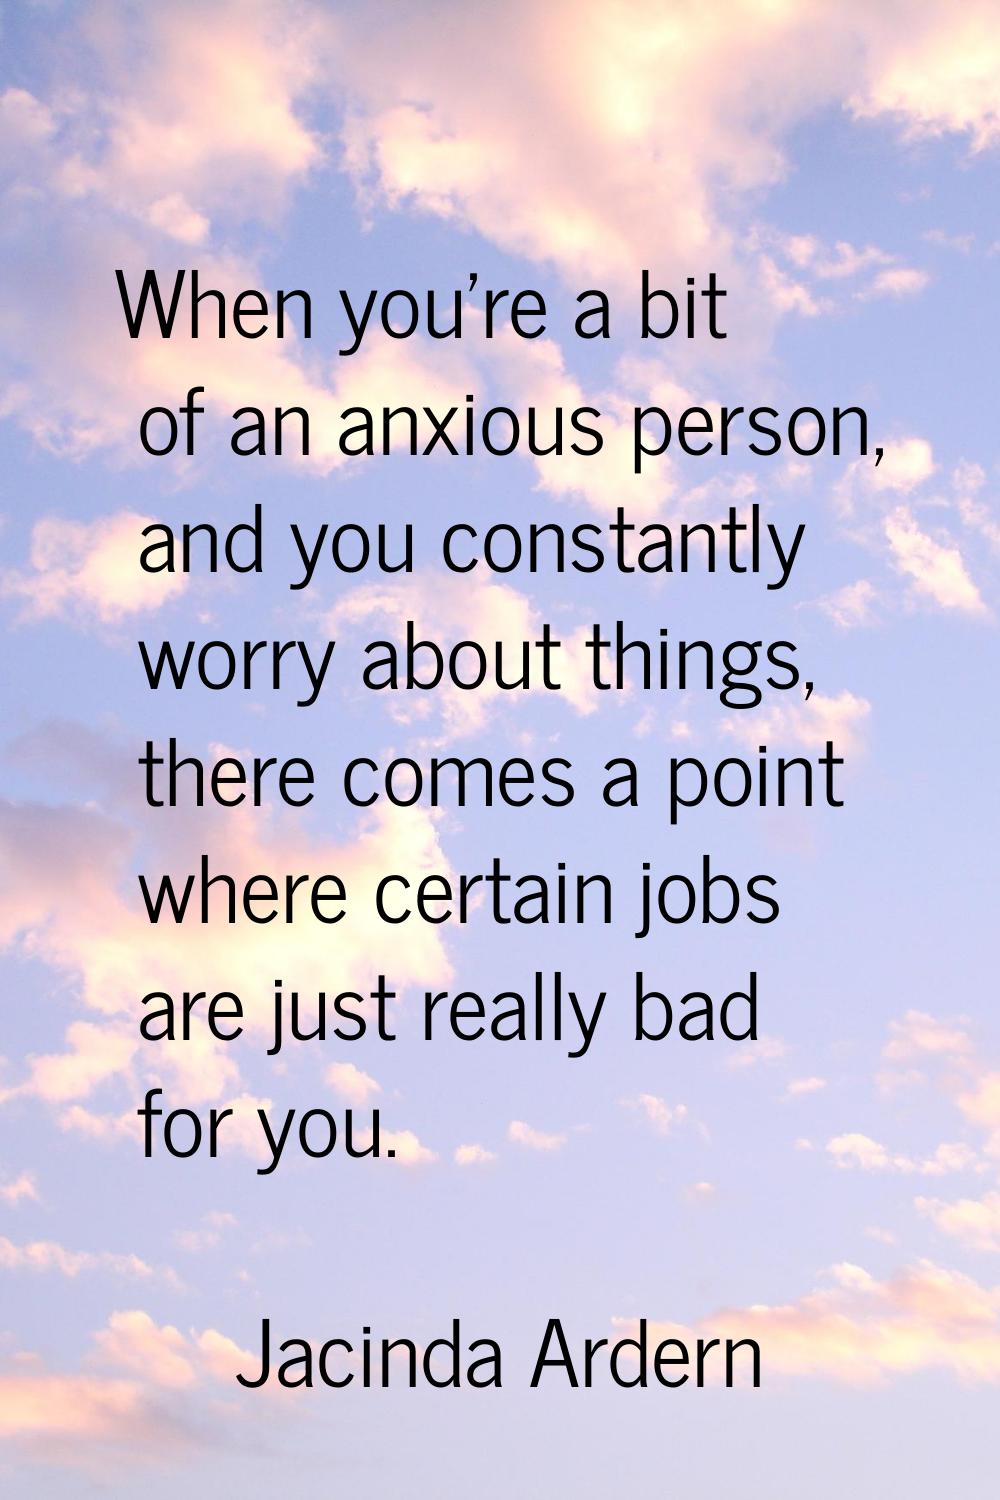 When you're a bit of an anxious person, and you constantly worry about things, there comes a point 